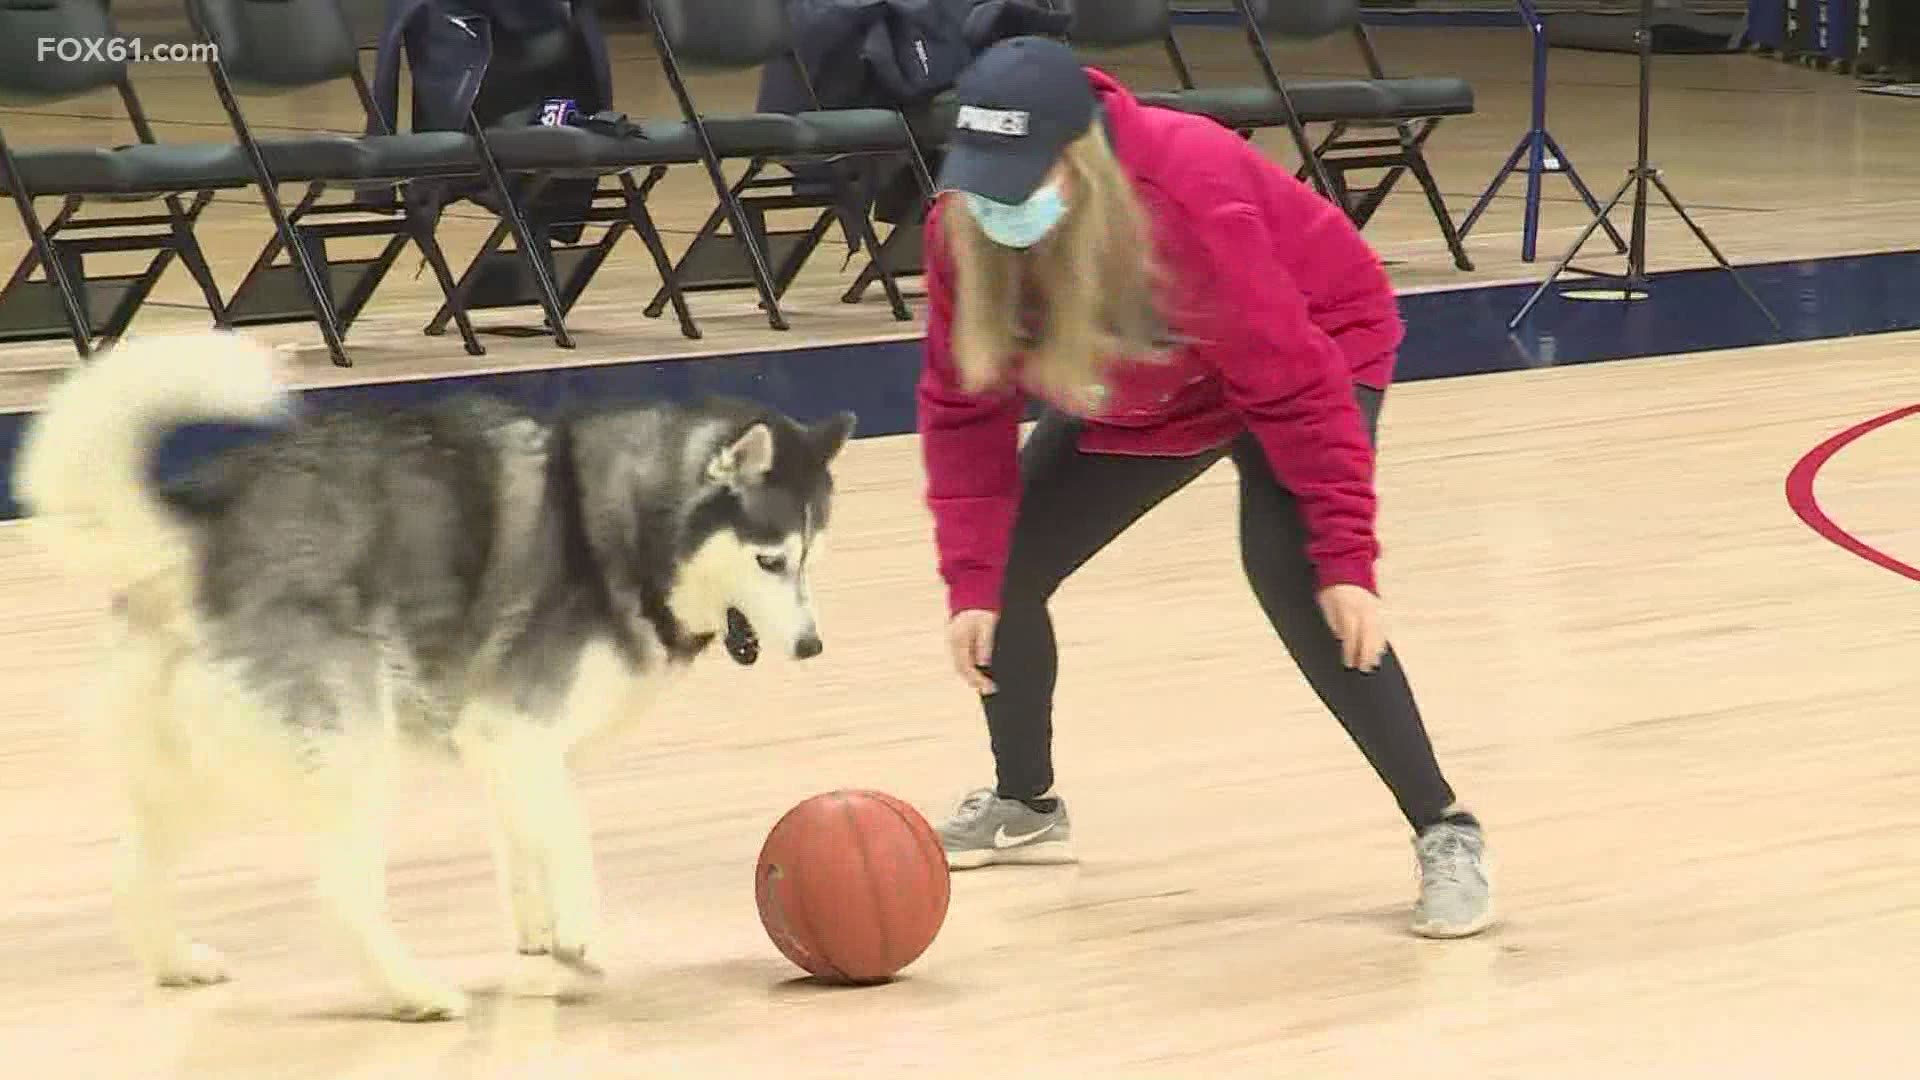 To get into game-day spirit as the UConn women head into the Final Four tonight, FOX61's Lauren Zenzie plays a game with Jonathan the Husky!